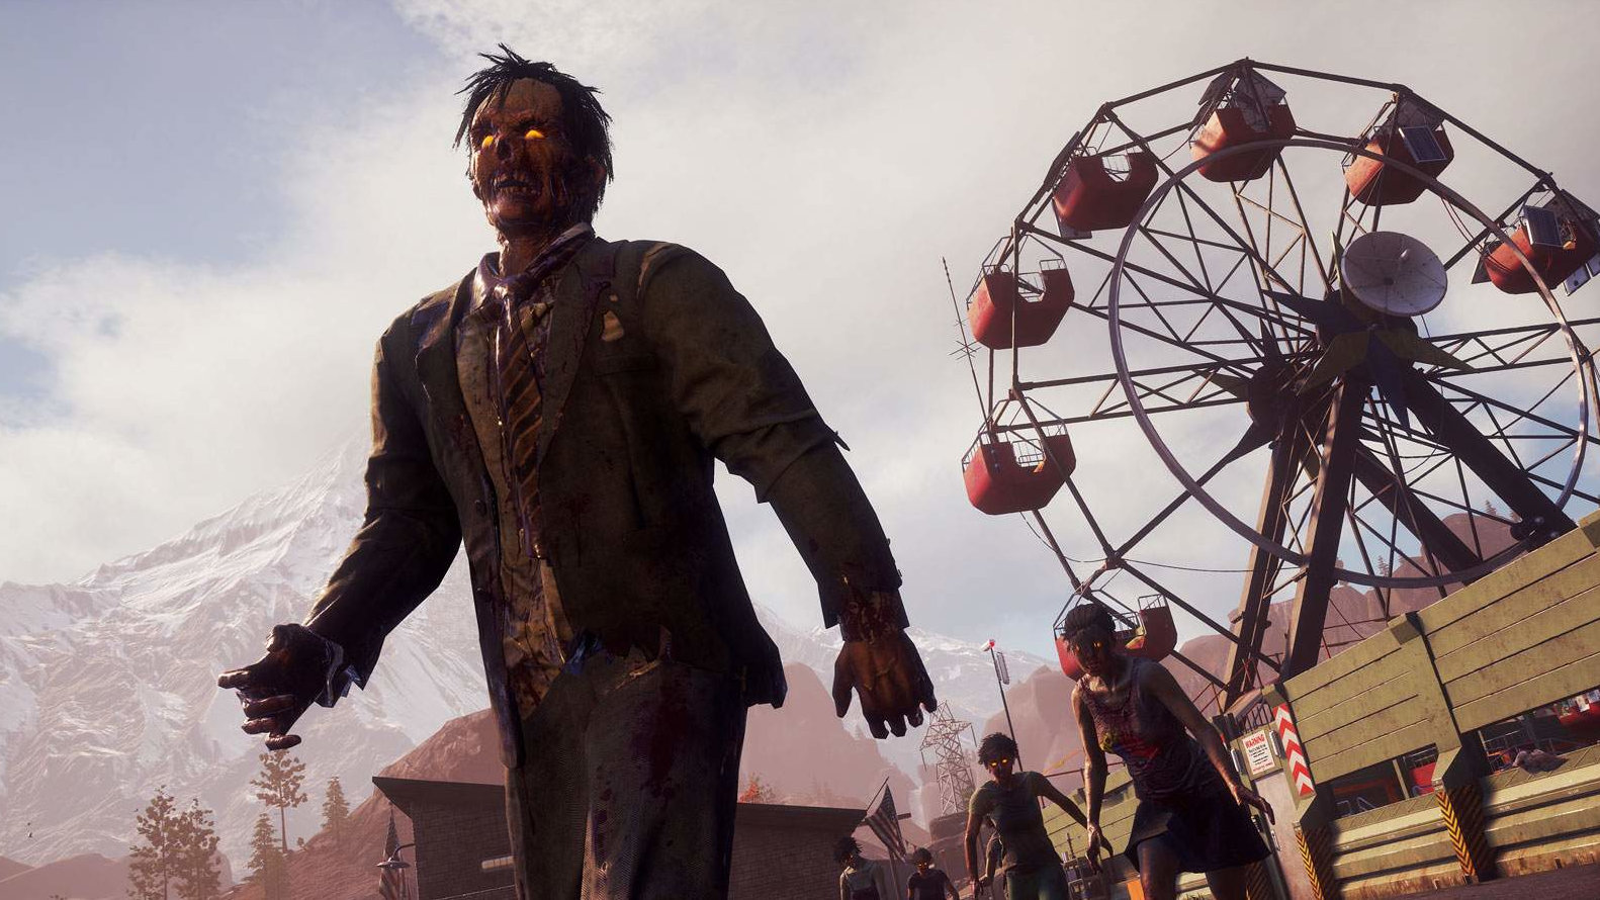 State of Decay 2 is coming to Steam in 2020